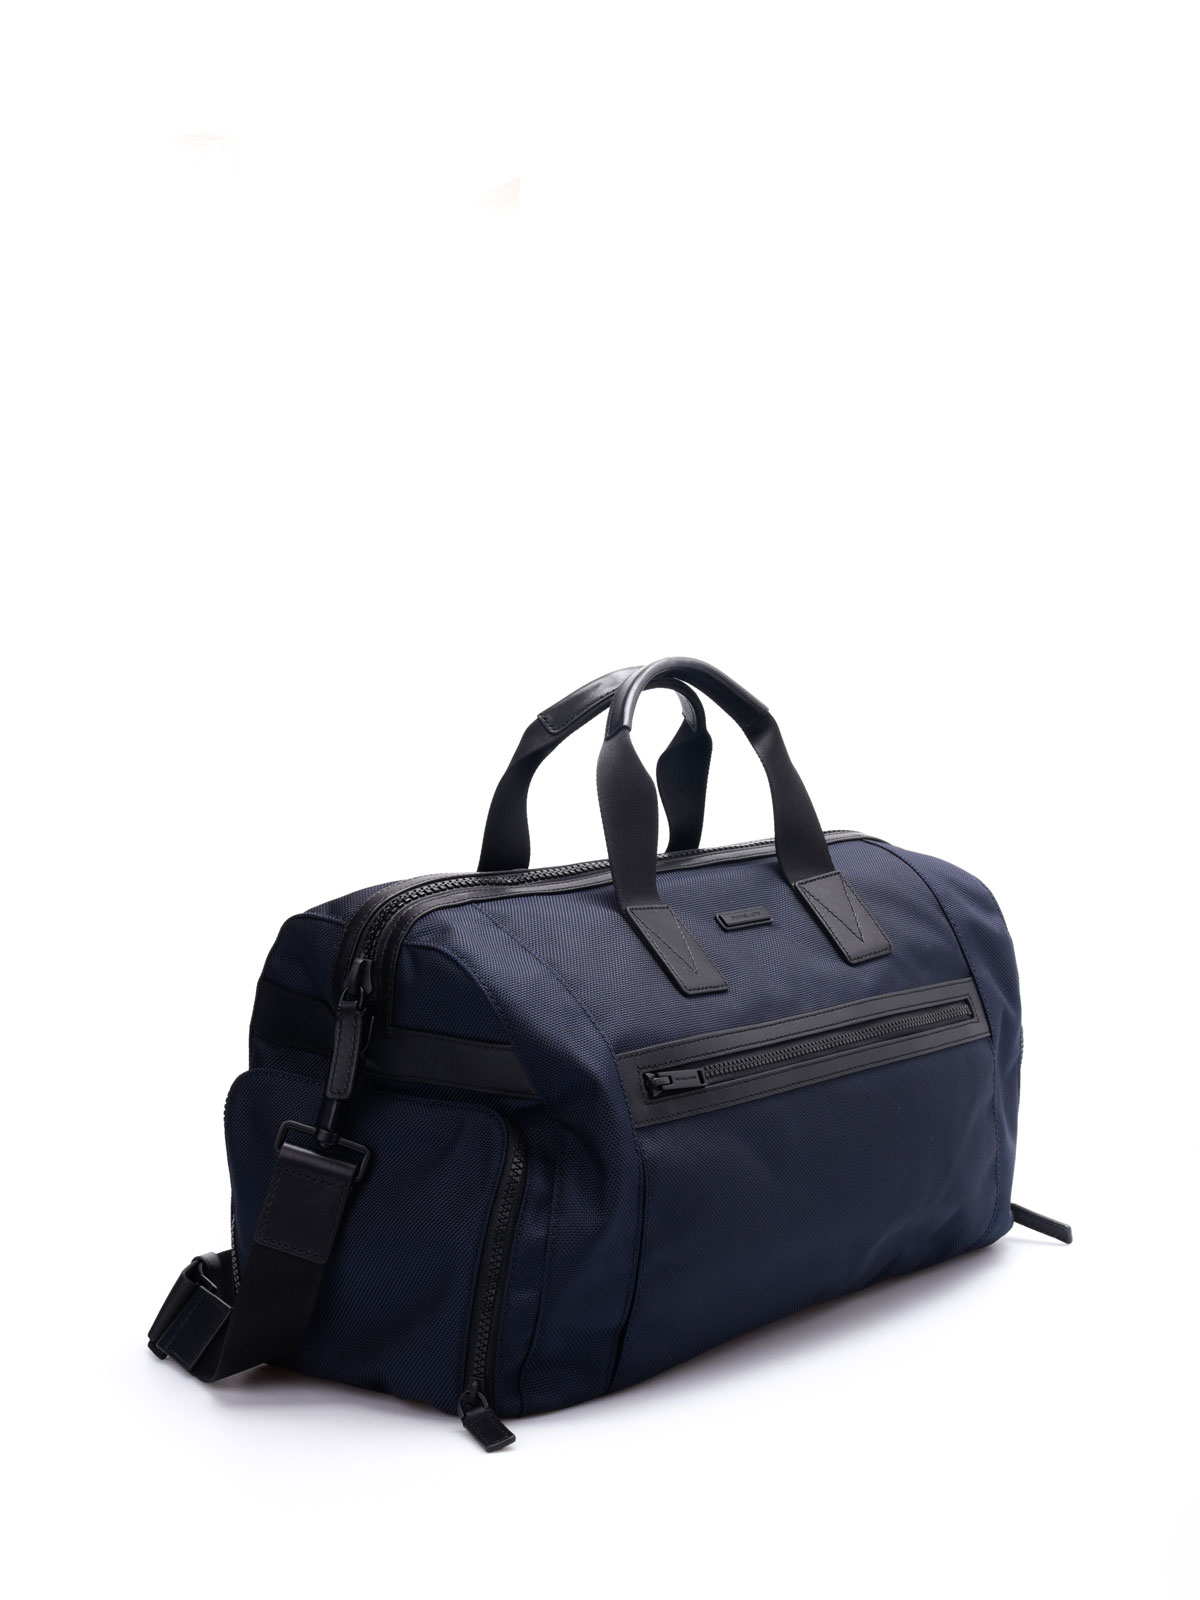 gym bags online